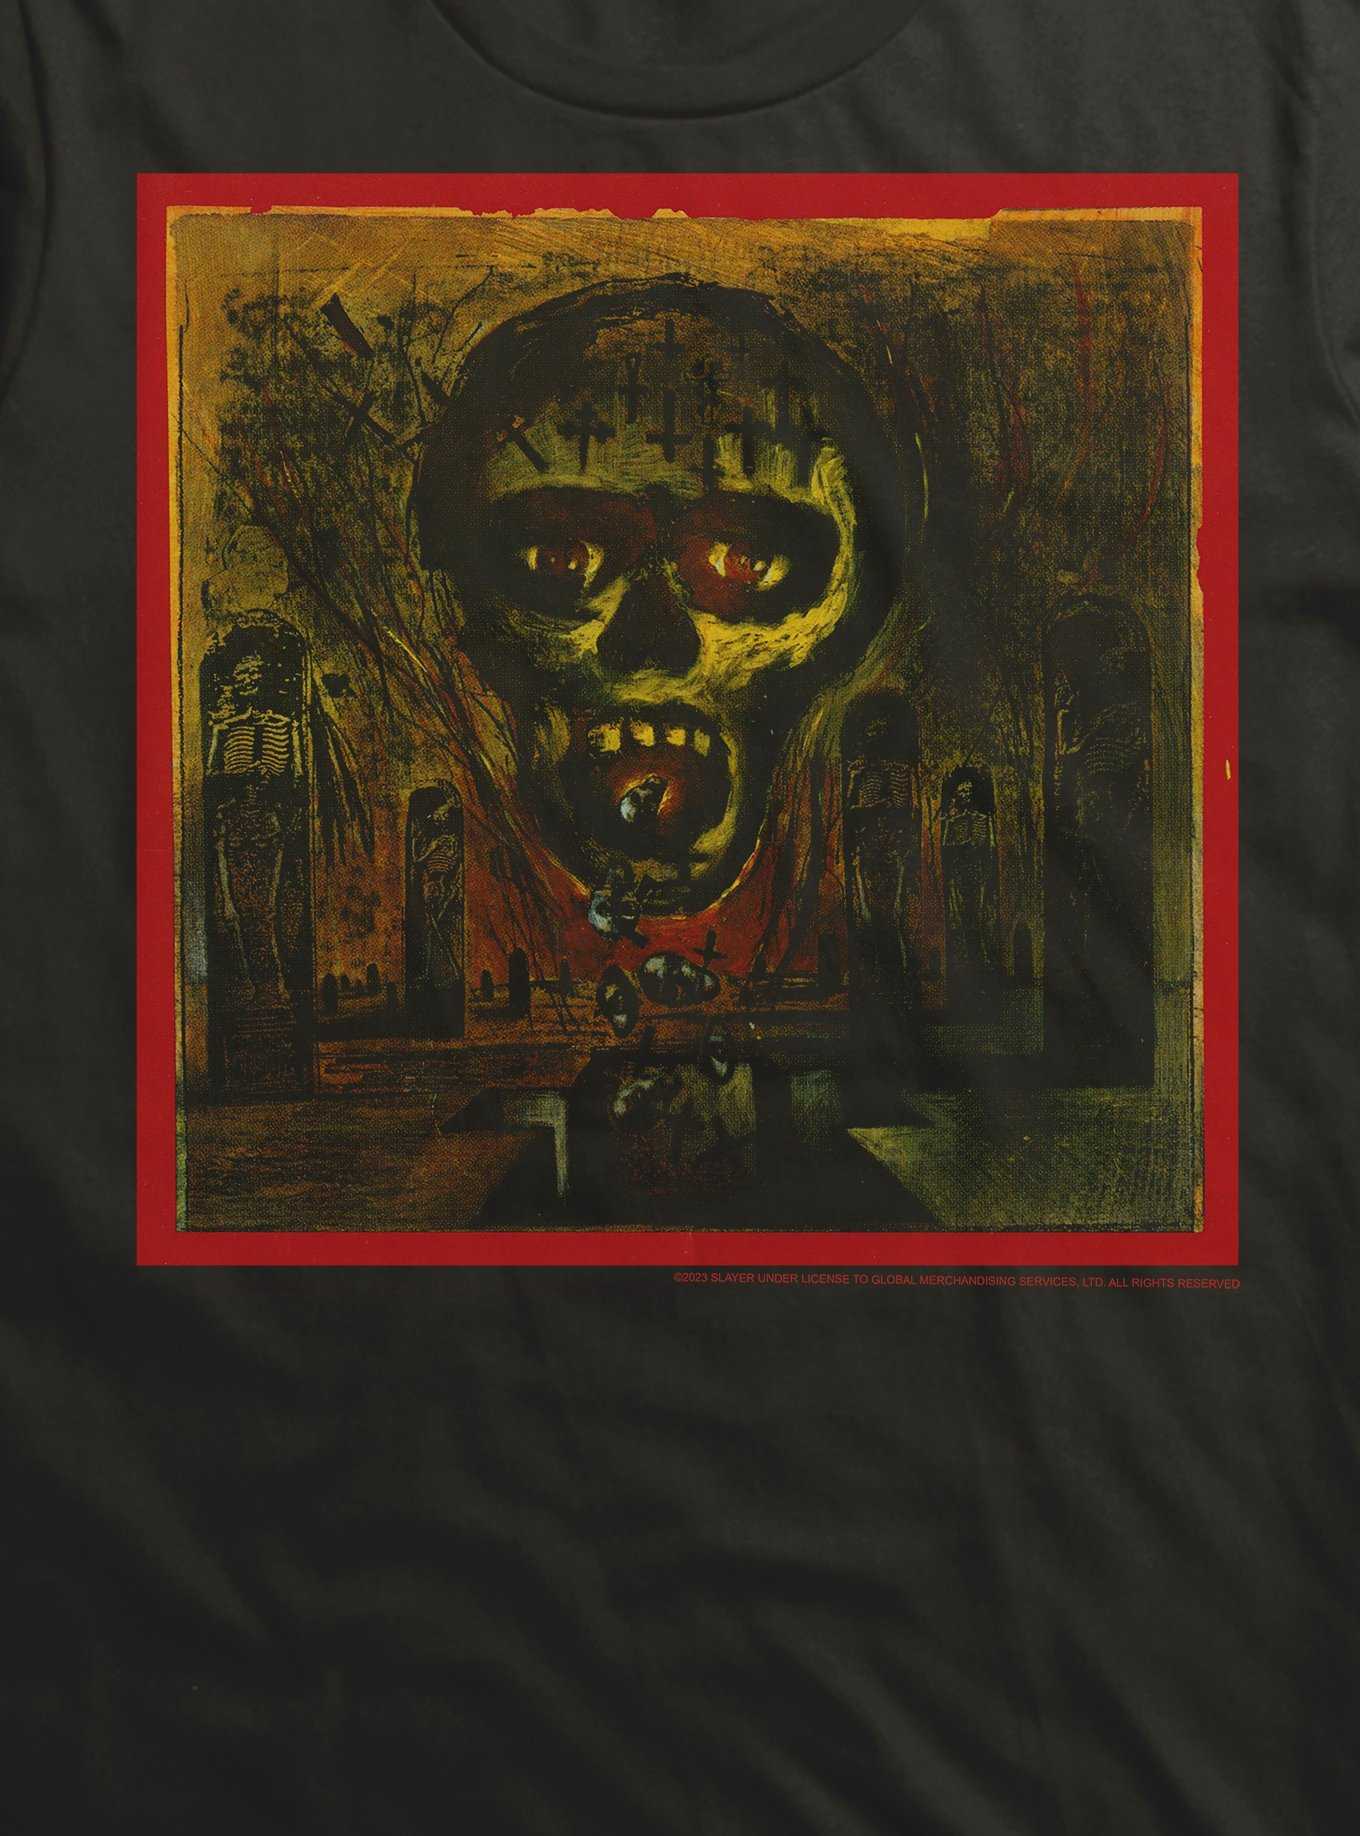 Slayer Seasons In The Abyss T-Shirt, , hi-res